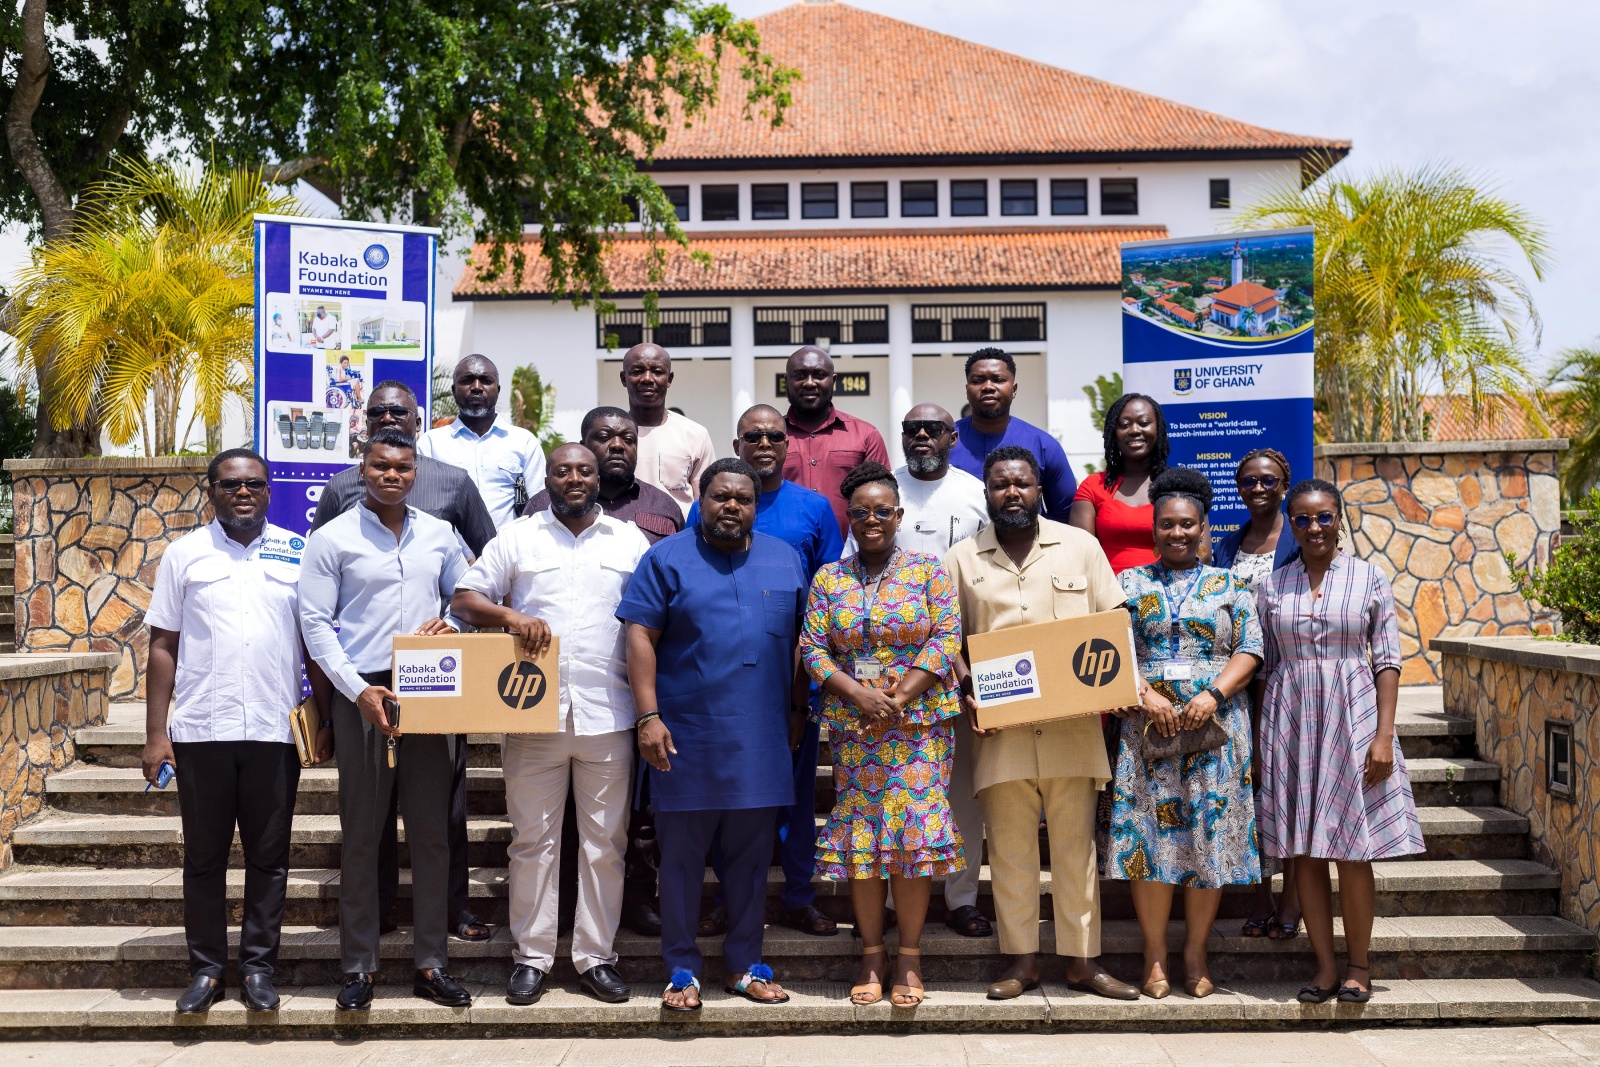 Kabaka Foundation Donates 20 Laptops in Support of 1S1L Initiative